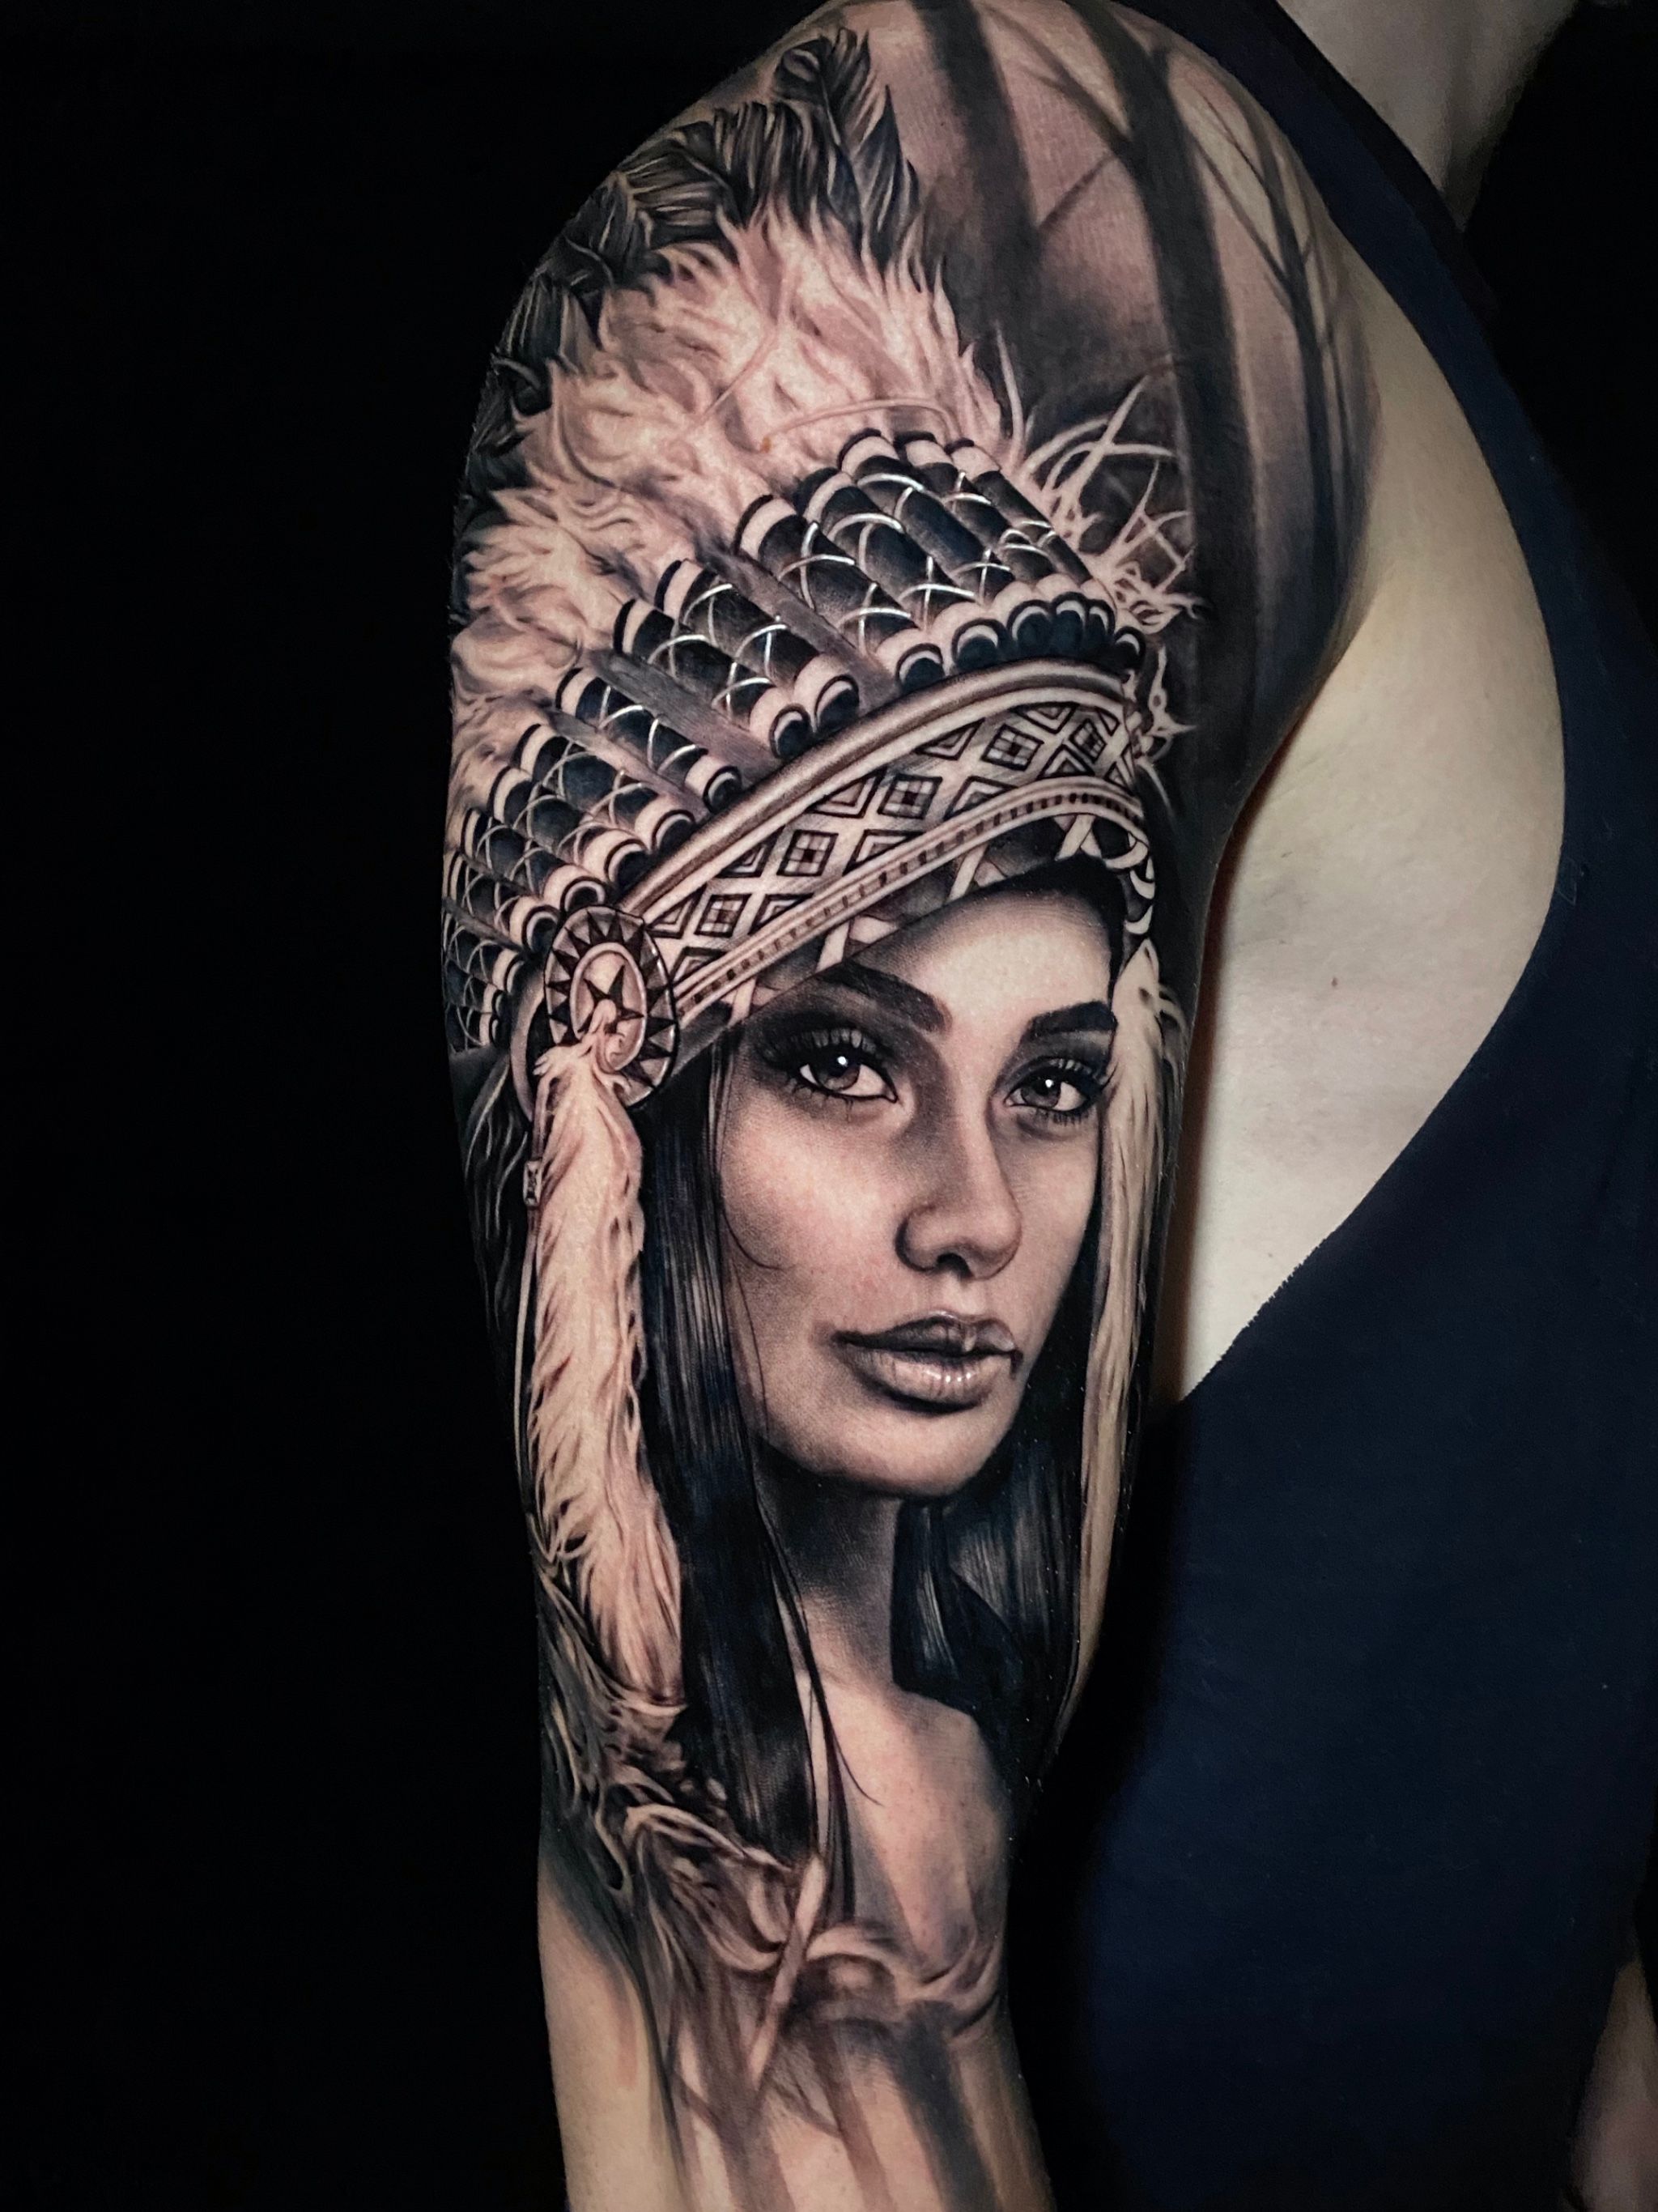 Experience Artistic Excellence for Portraying the Portrait Tattoo in Perth